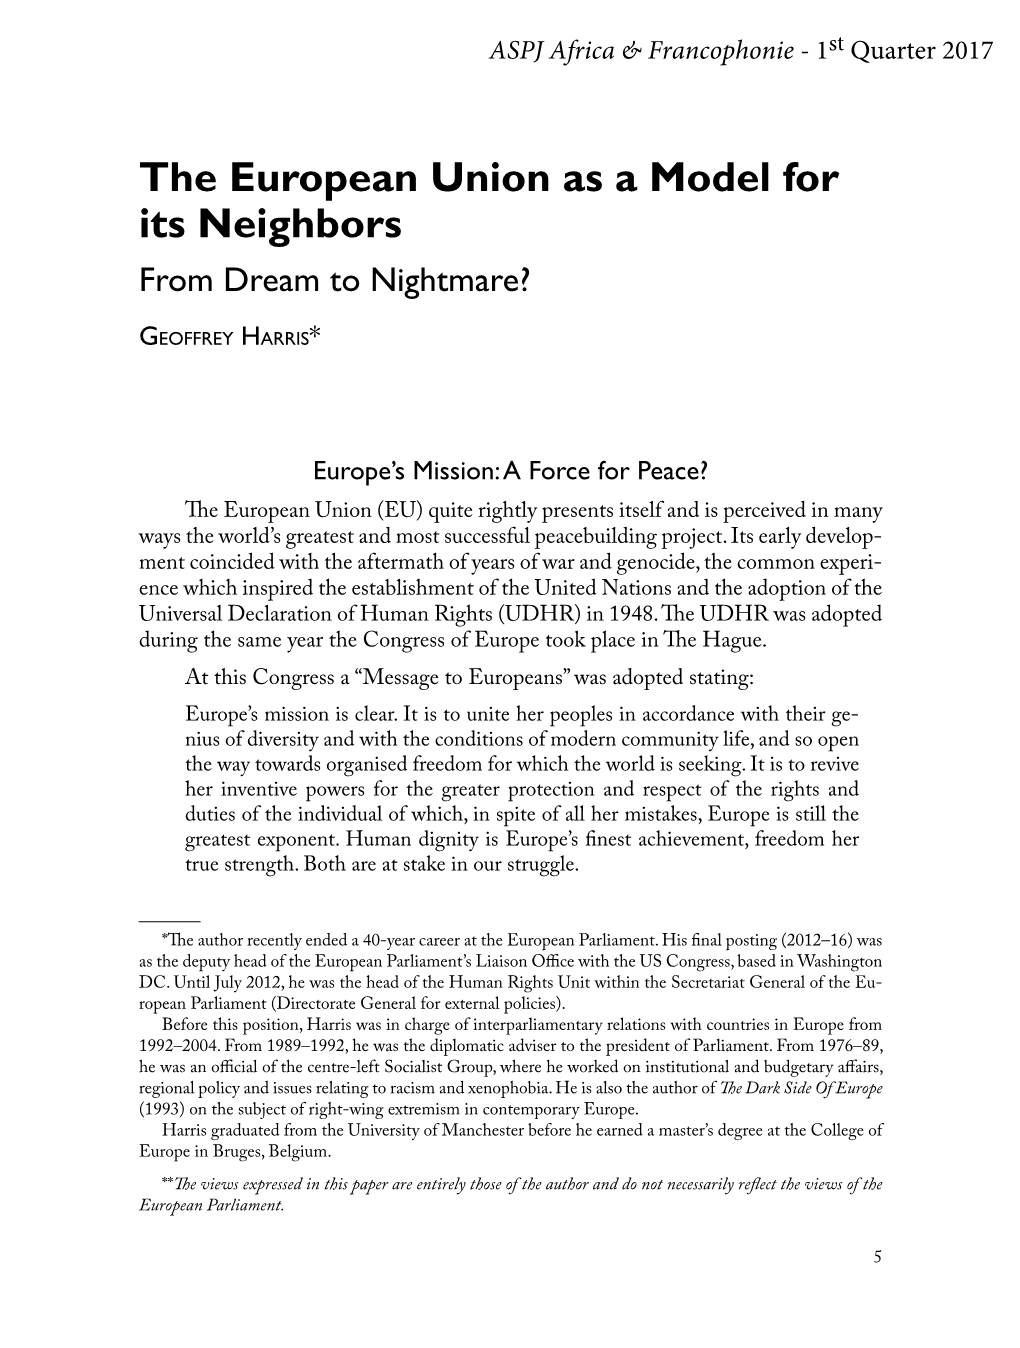 The European Union As a Model for Its Neighbors: from Dream To